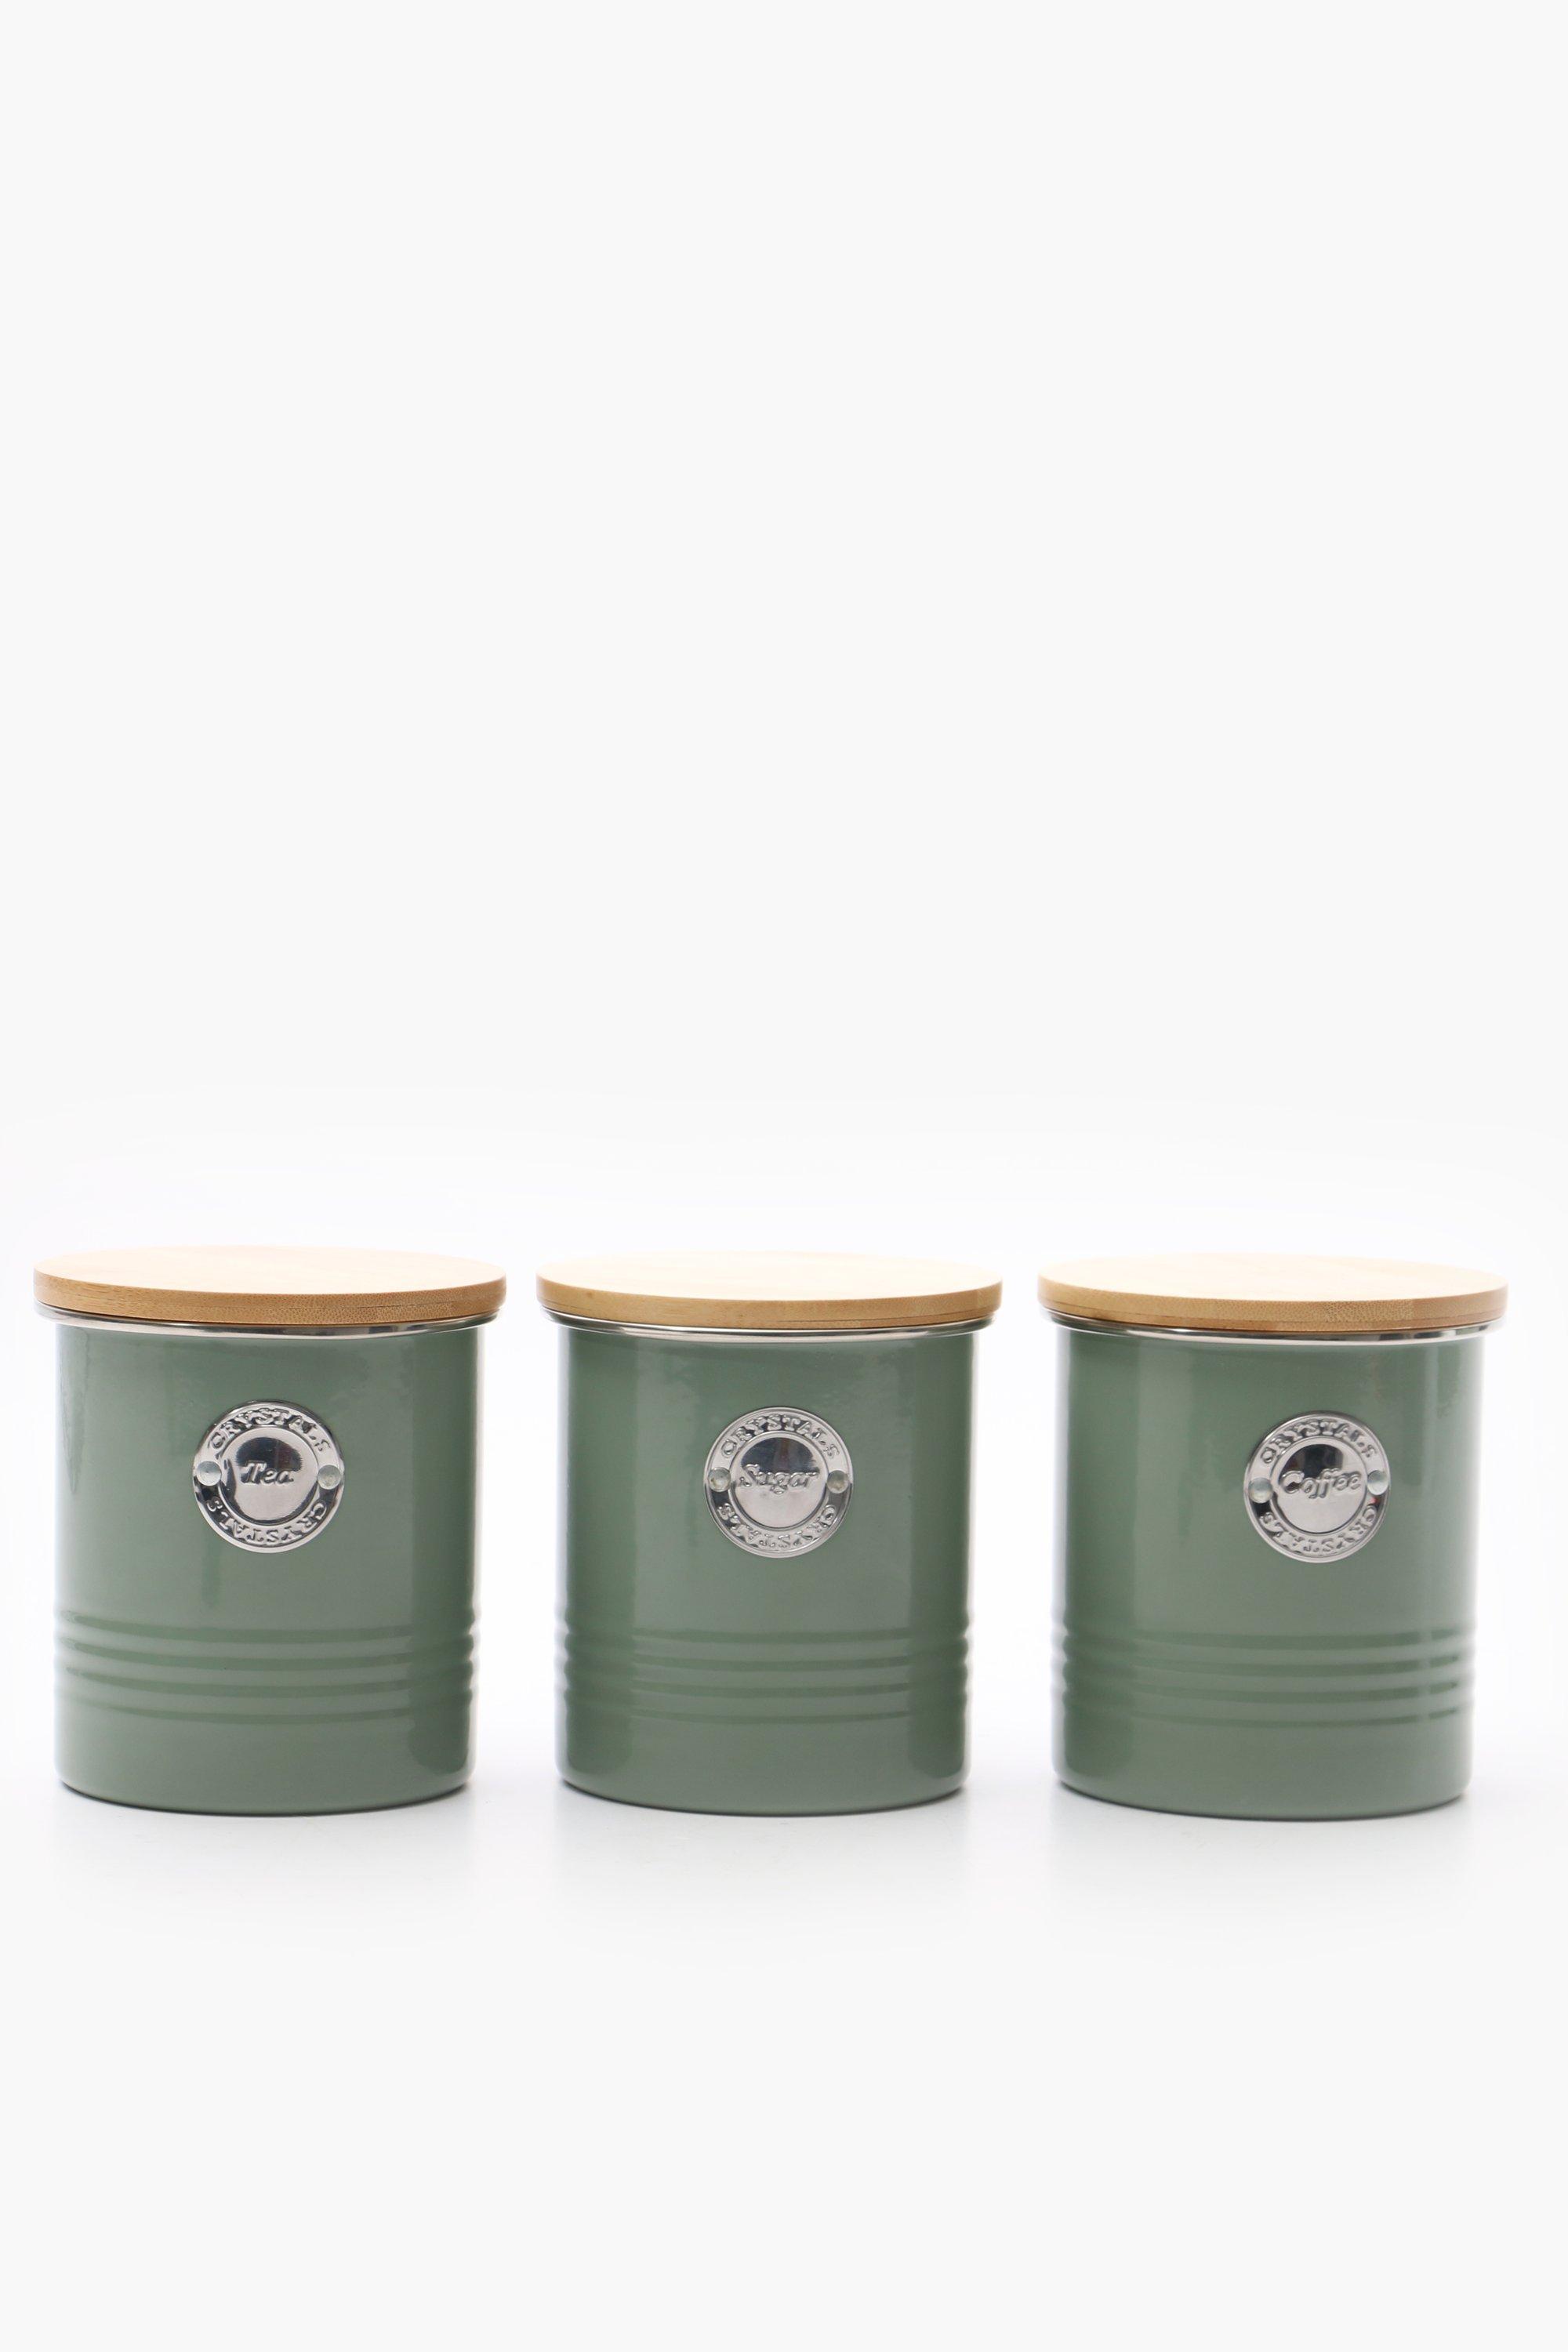 3 Powder Coated Metal Canisters